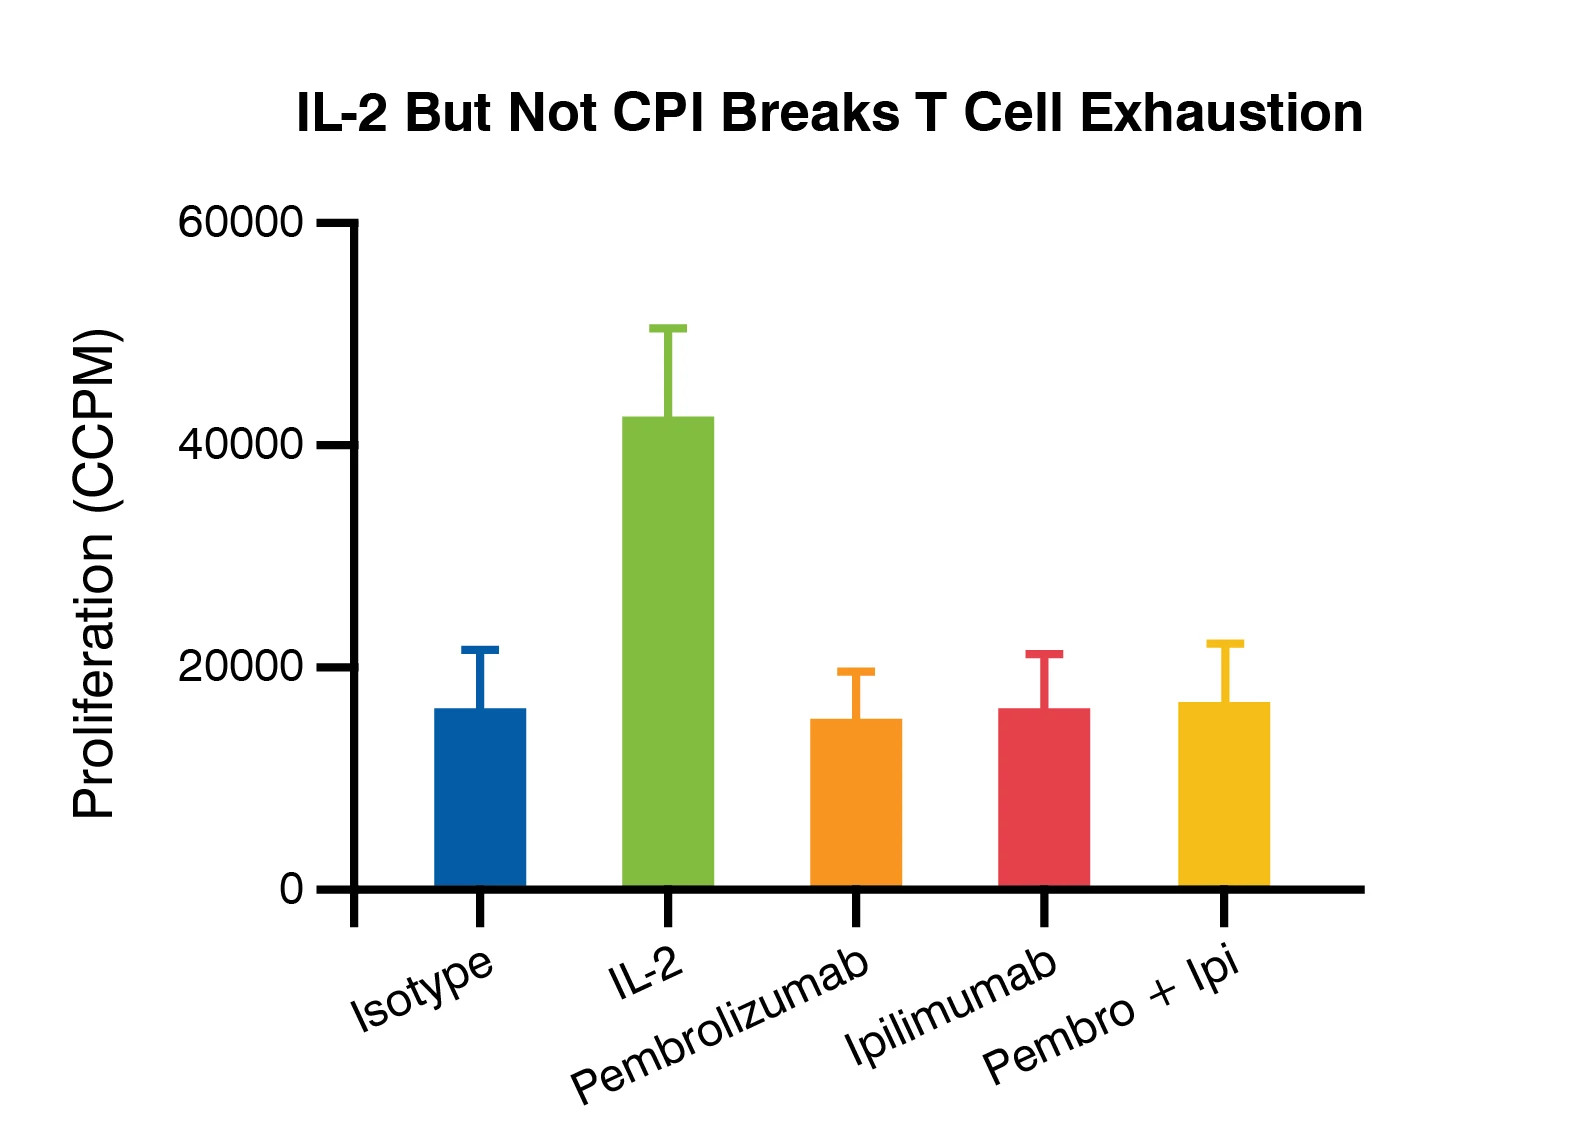 Graphs showing how Anti-LAG3 antibody dose-dependently enhances CD8+ T cell activation